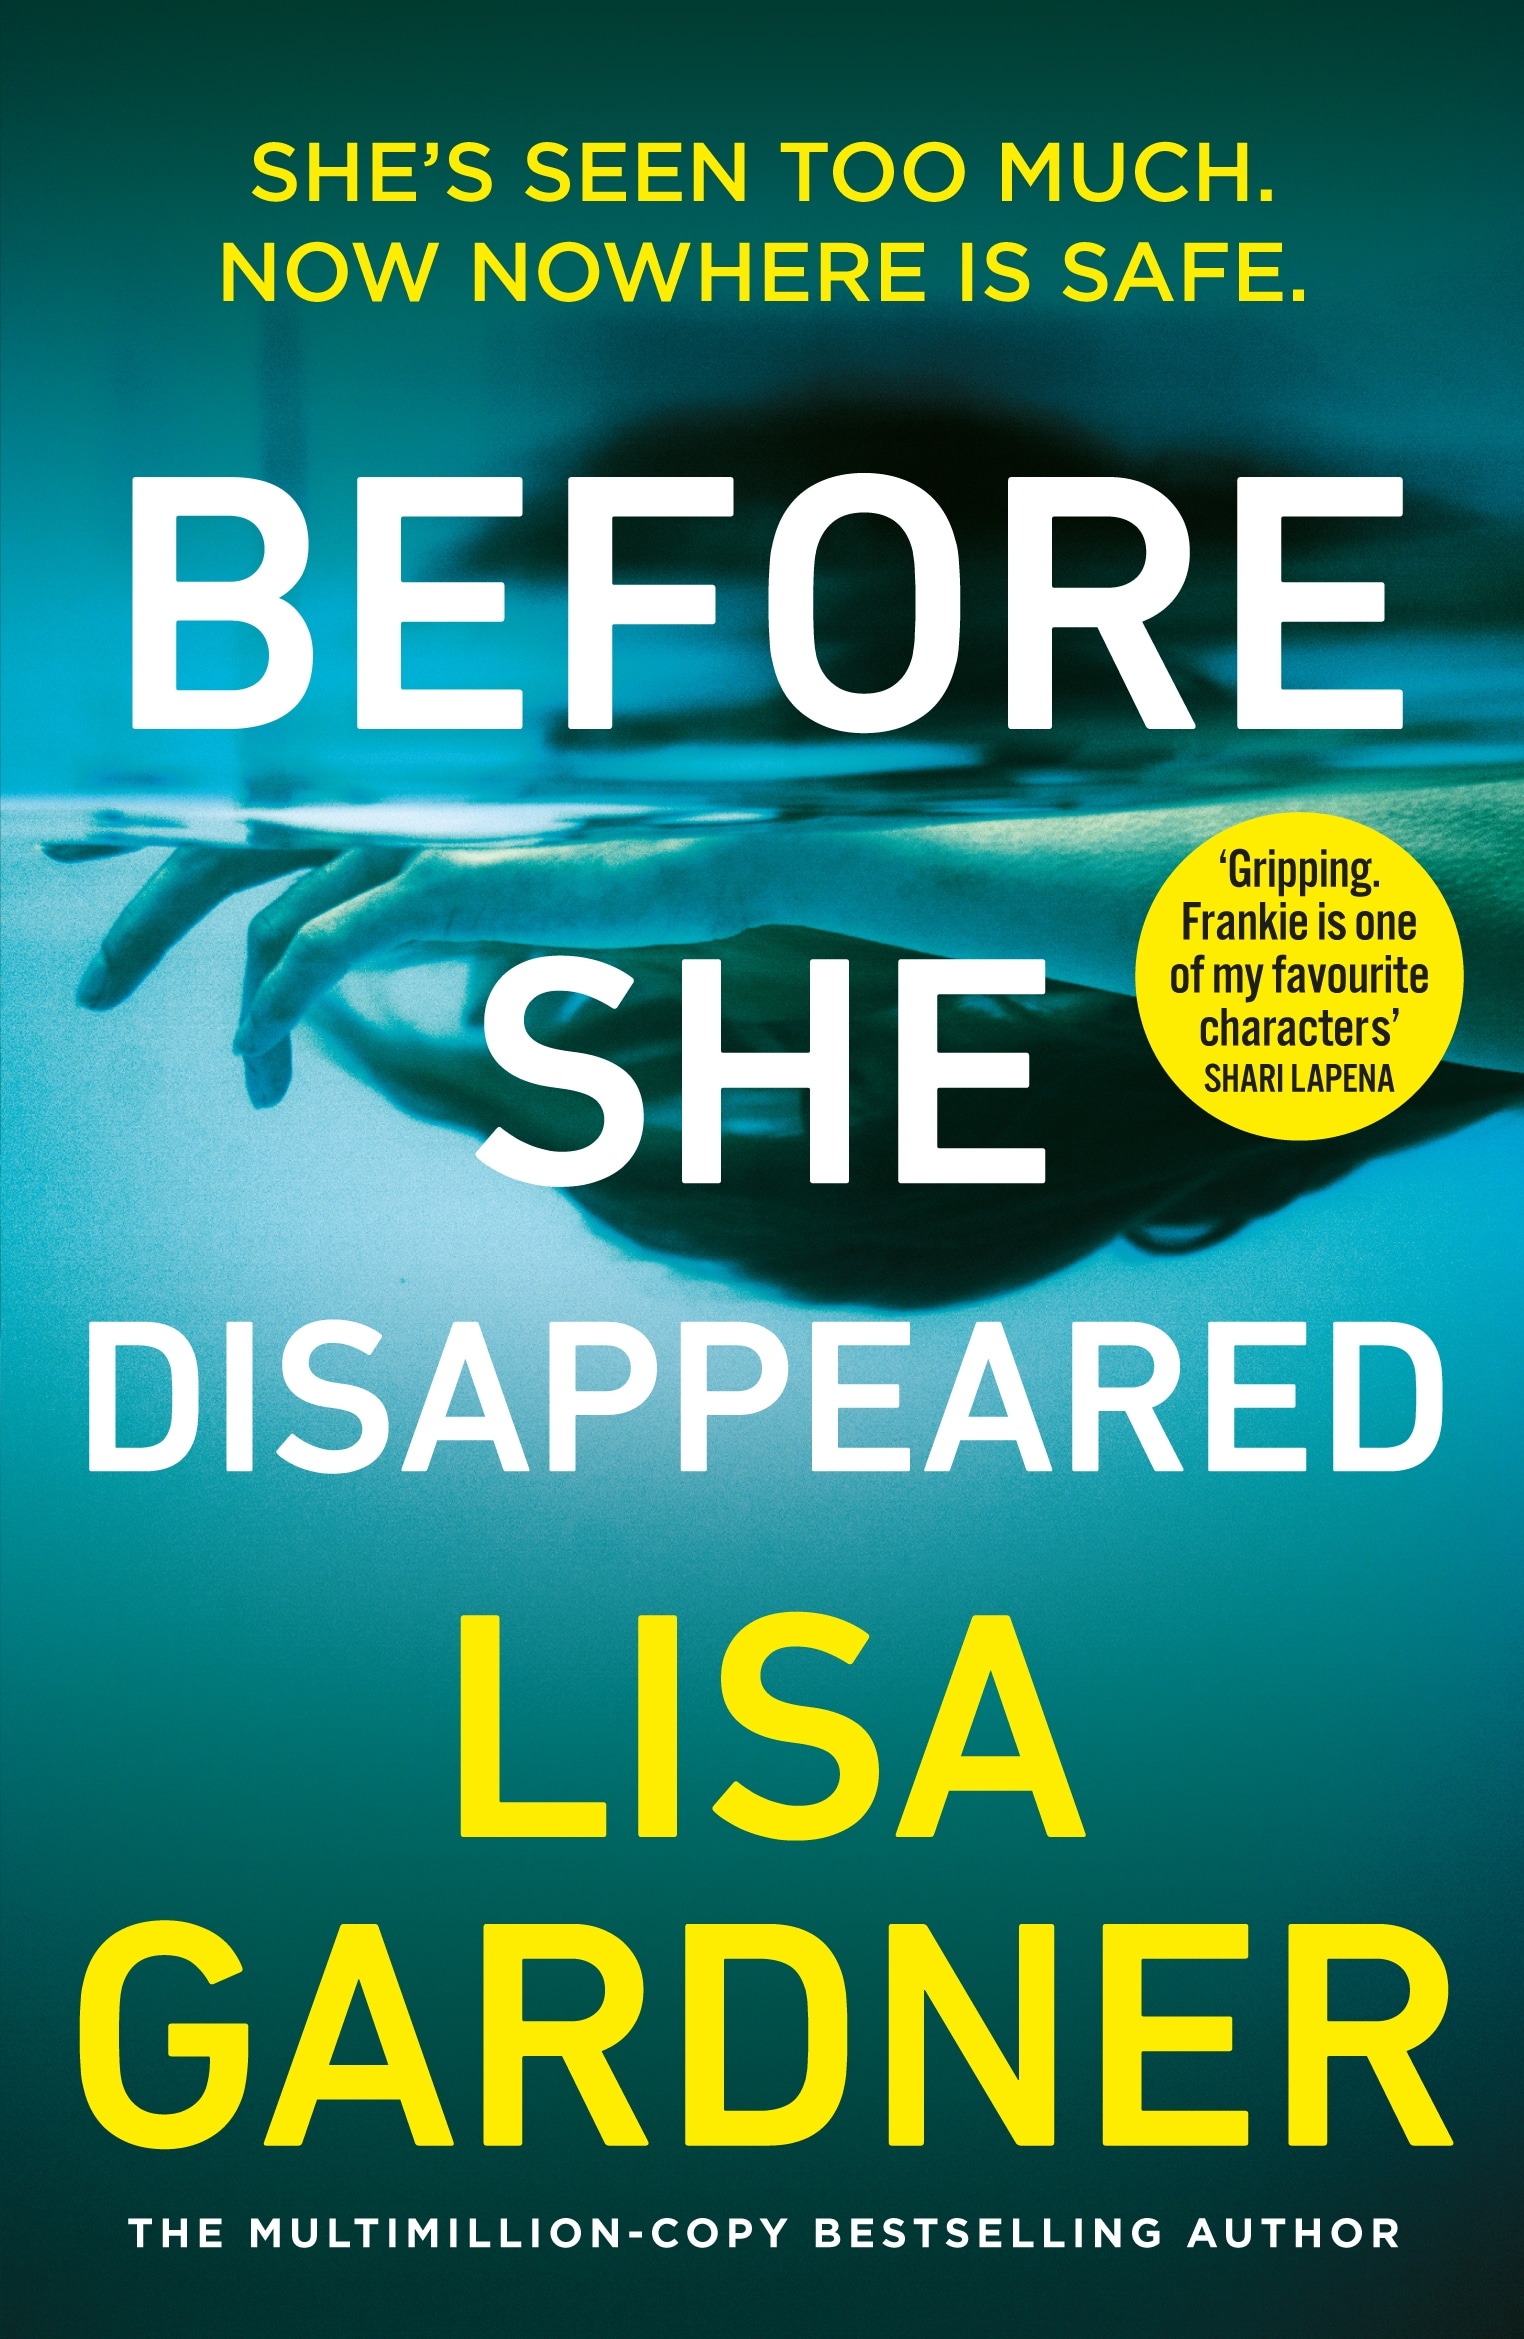 Book jacket of Before She Disappeared by Lisa Gardner